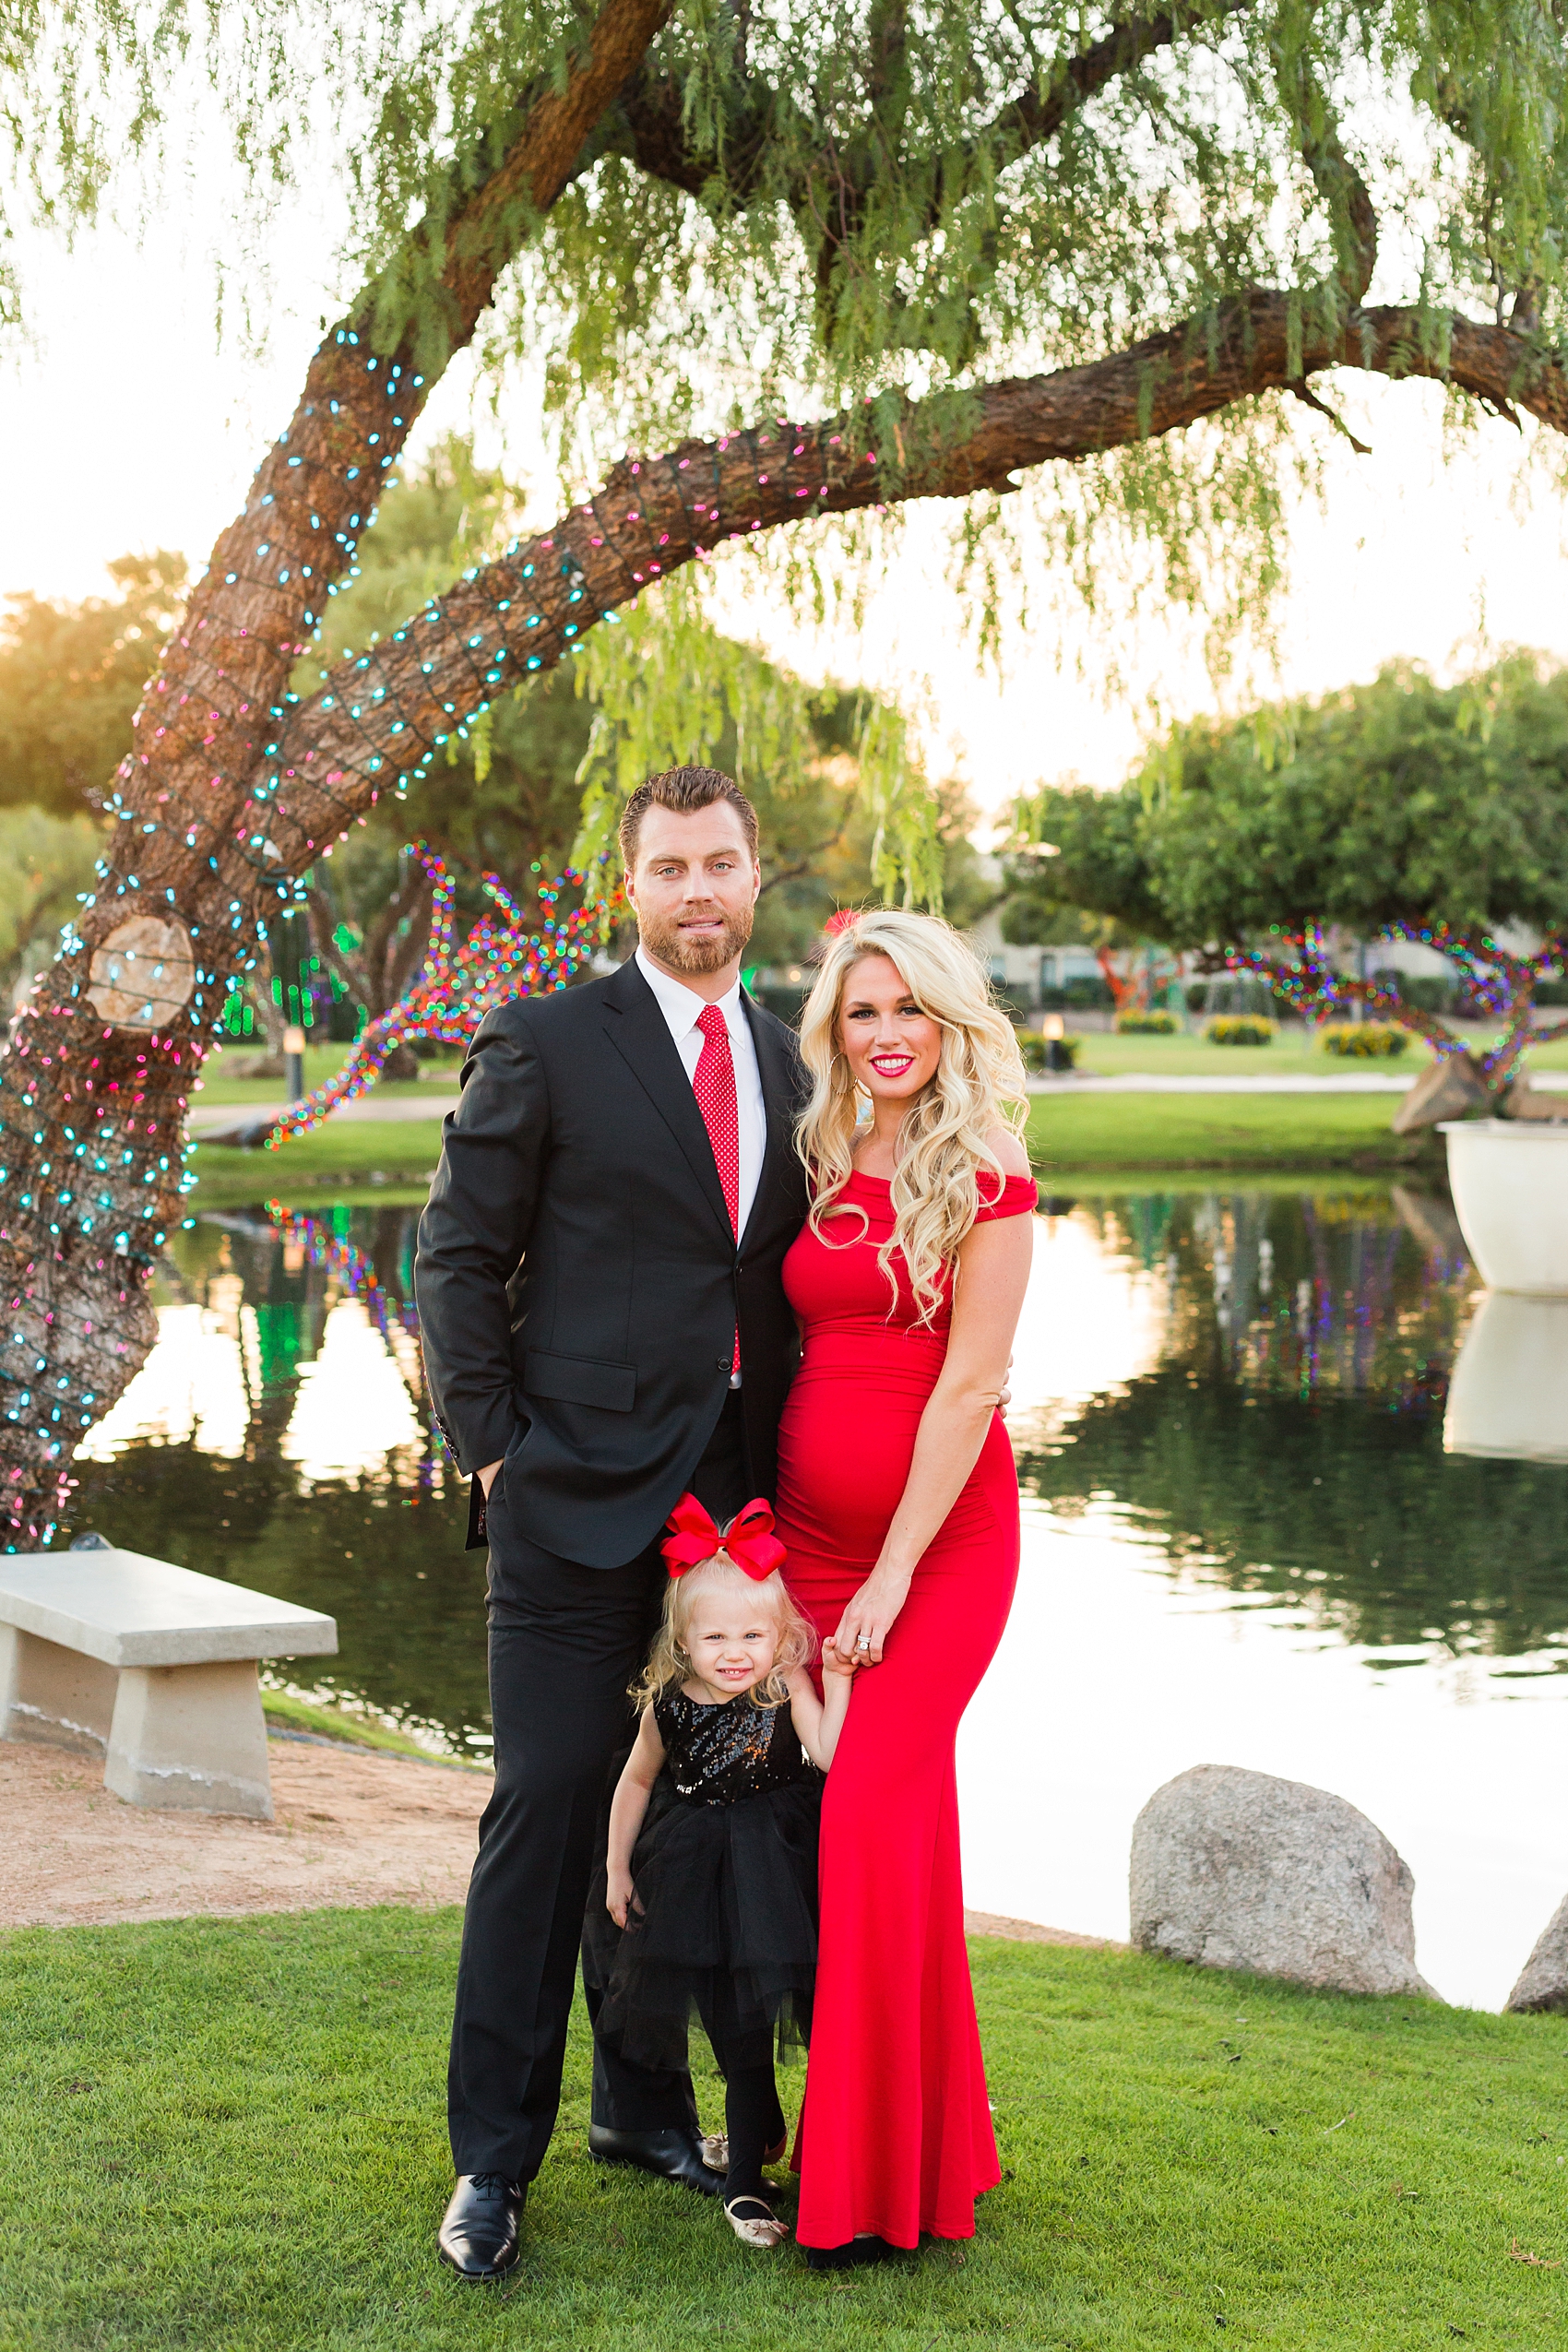 Leah Hope Photography | Scottsdale Phoenix Arizona | Fairmont Princess Resort | Family Pictures | Maternity Photos | Baby Announcement | Elegant Classy Upscale Style | What to Wear | Family Pregnancy Poses